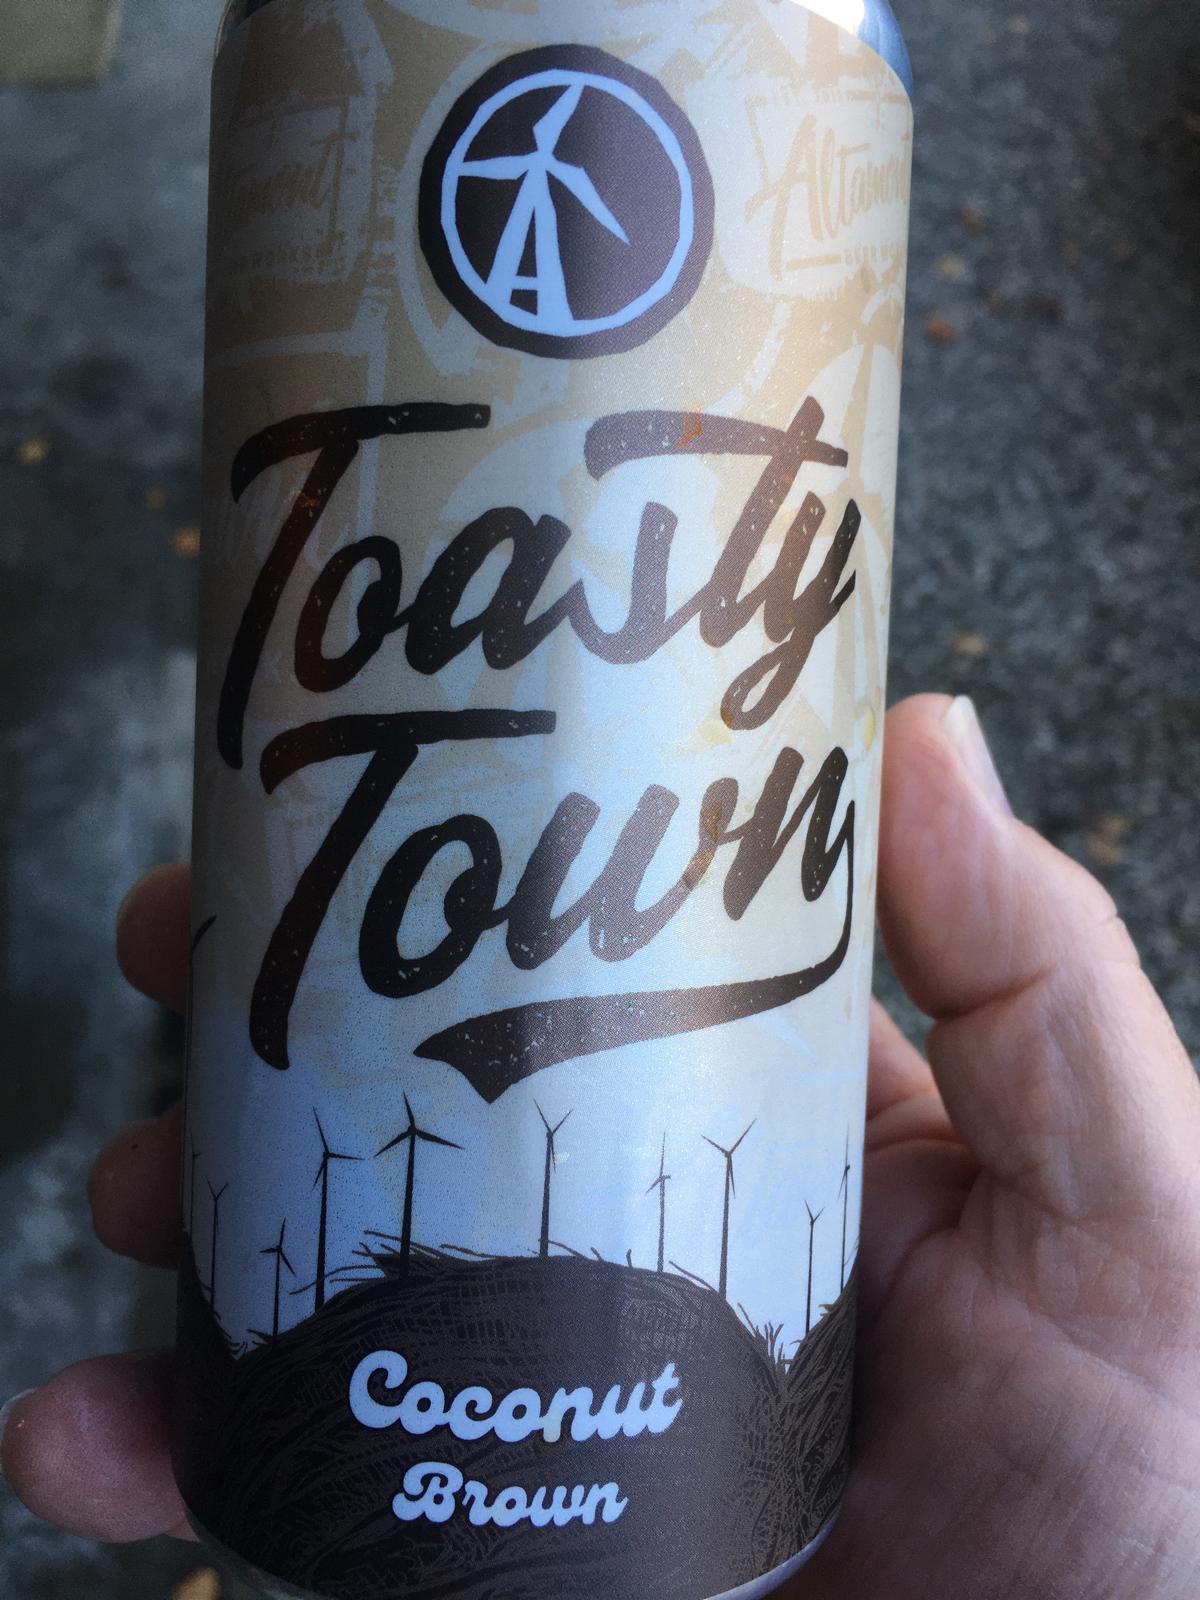 Toasty Town Coconut Brown